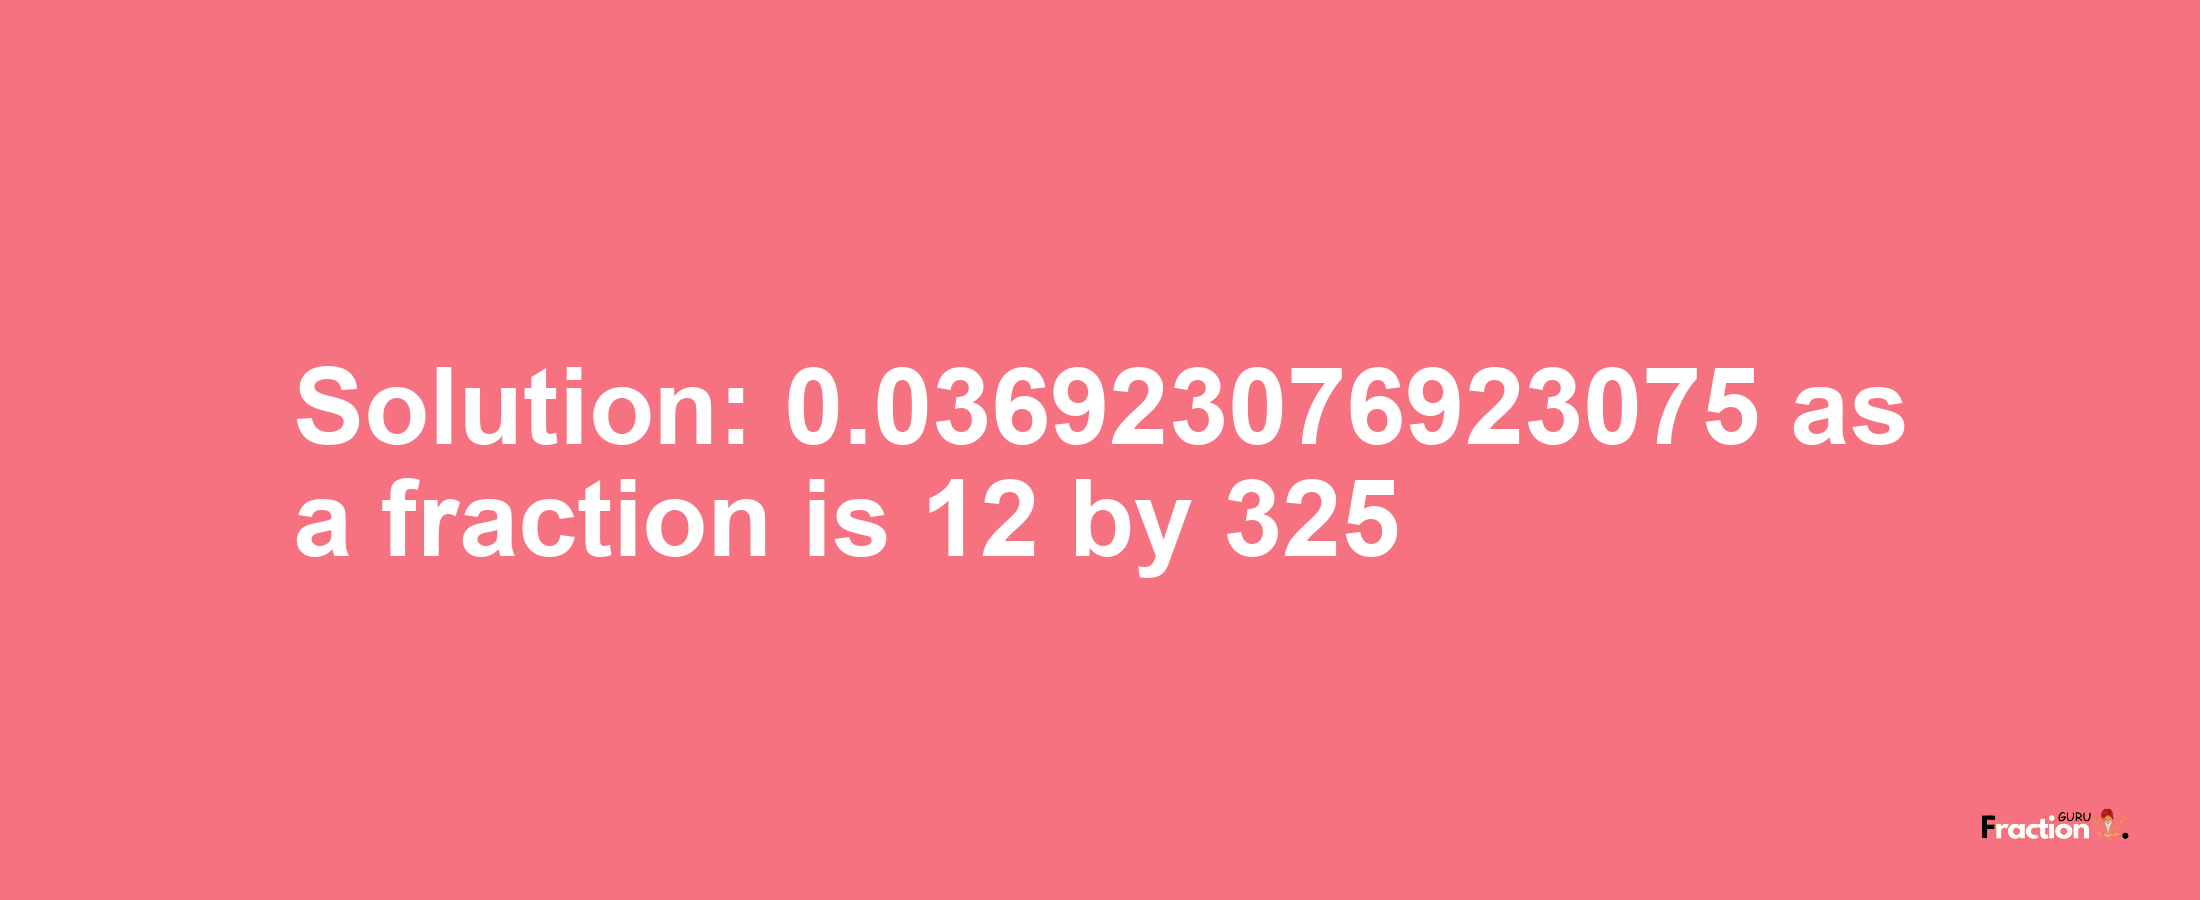 Solution:0.036923076923075 as a fraction is 12/325